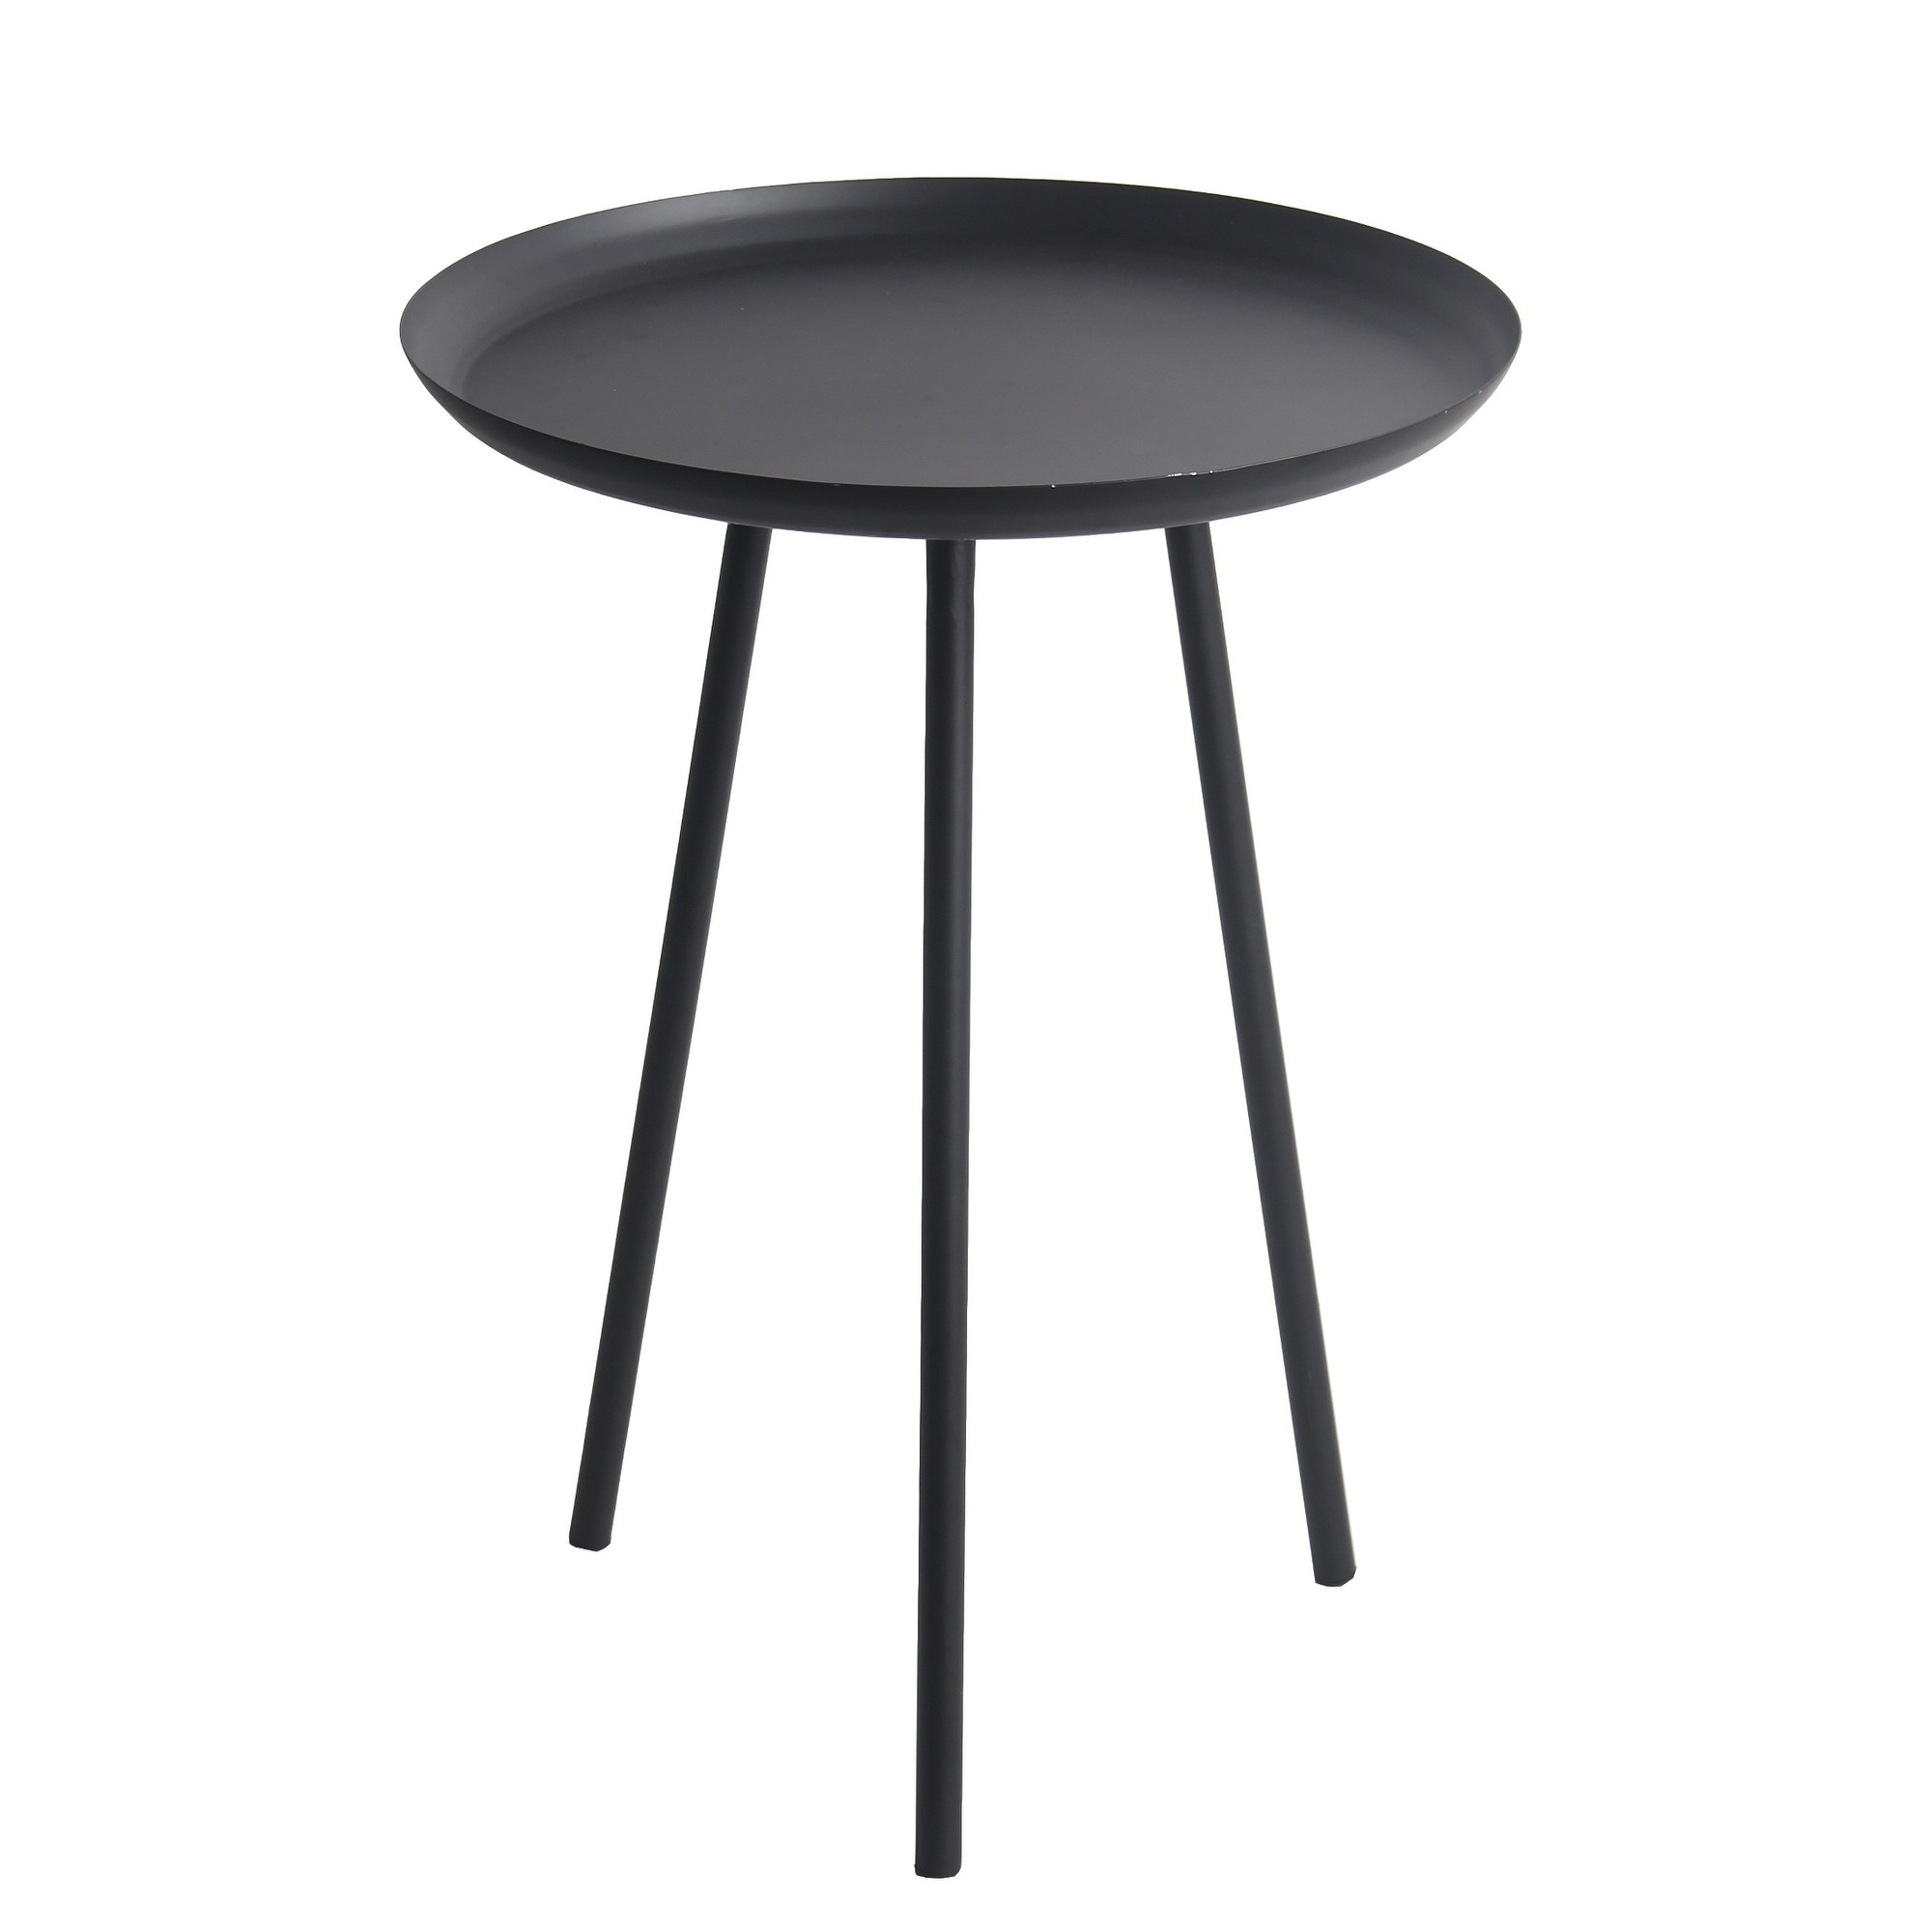 privilege black metal round accent table free shipping today imitation furniture stackable snack tables umbrella modern tablecloth coffee with legs small gray end high top patio